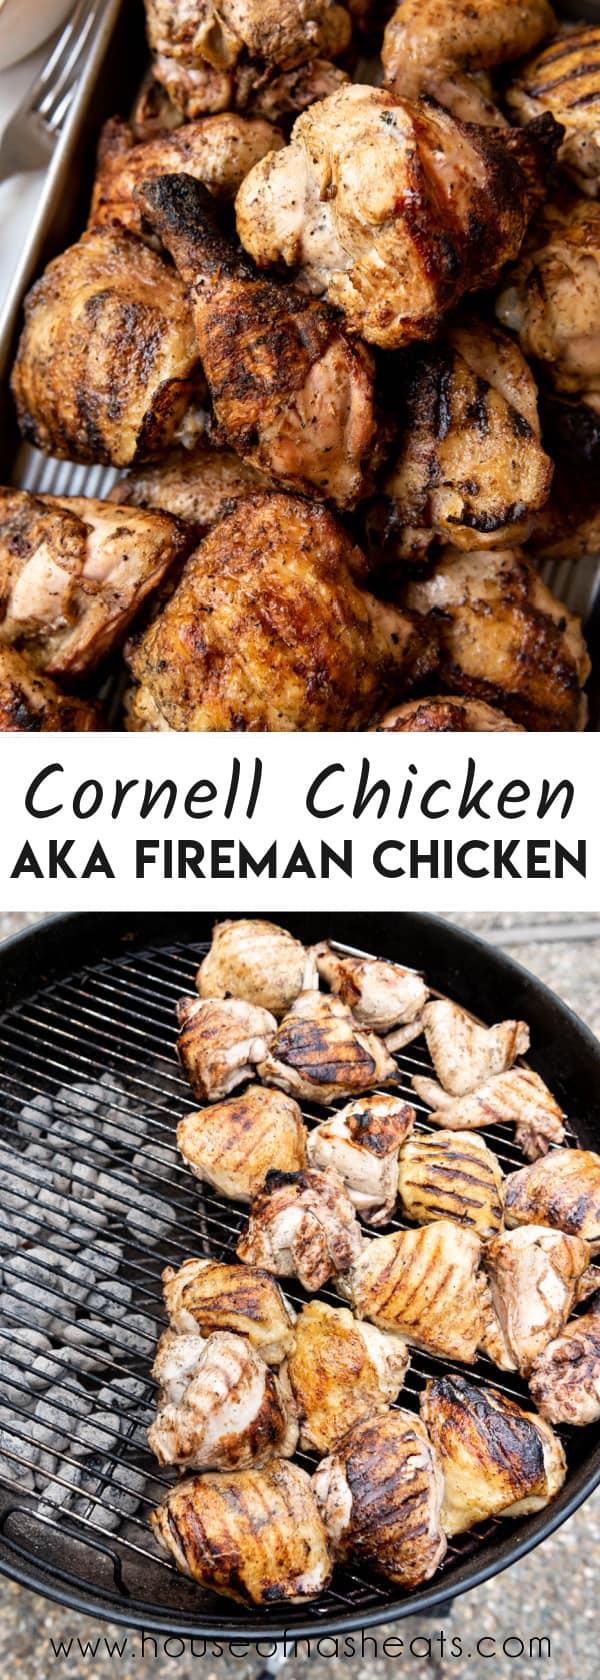 A collage of images of Cornell chicken with text overlay.